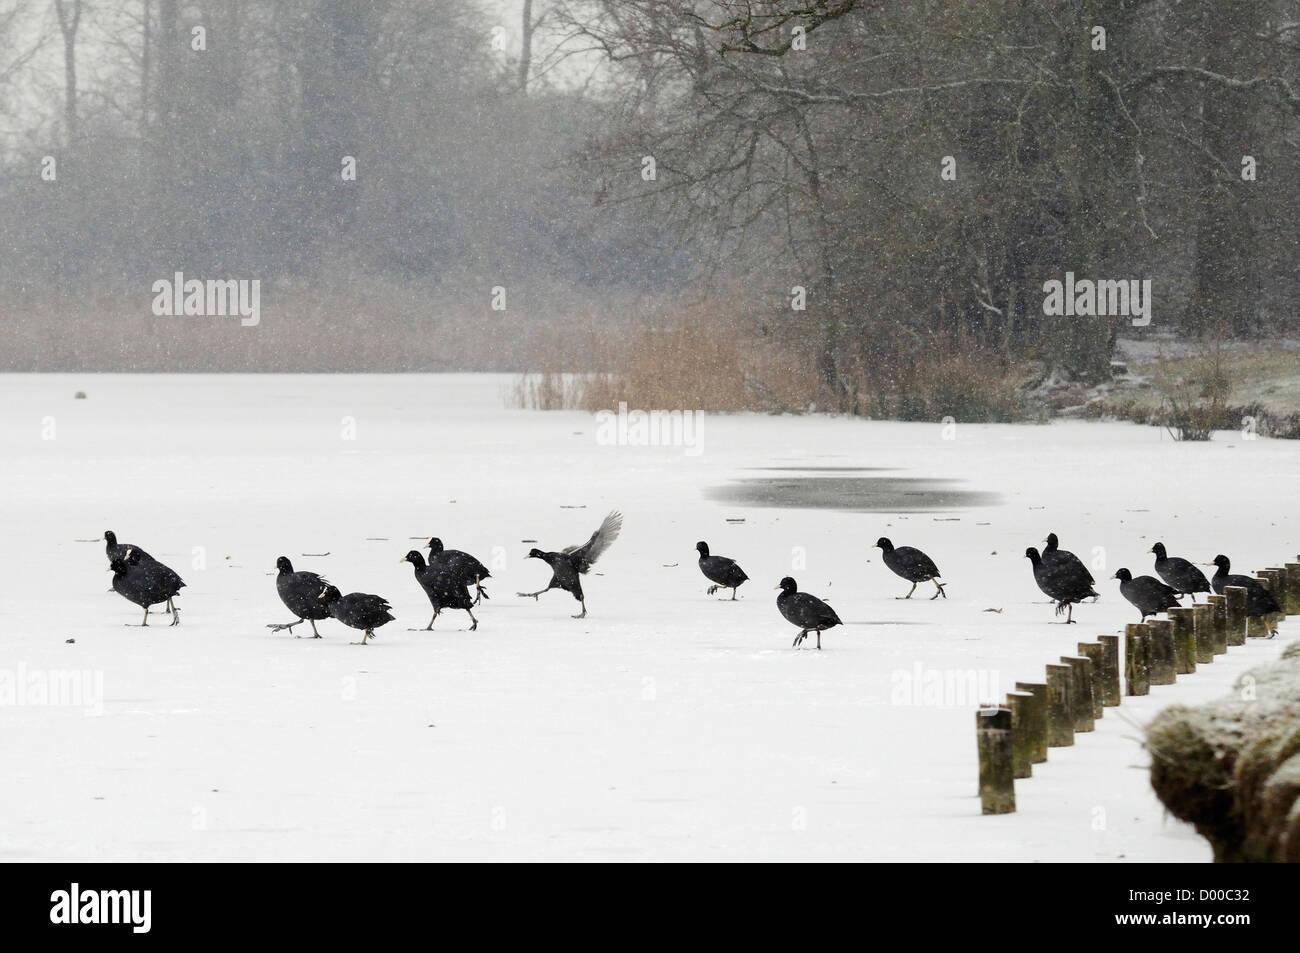 Group of Coots (Fulica atra) walking and running on snow covered lake in blizzard, Wiltshire, UK, February. Stock Photo